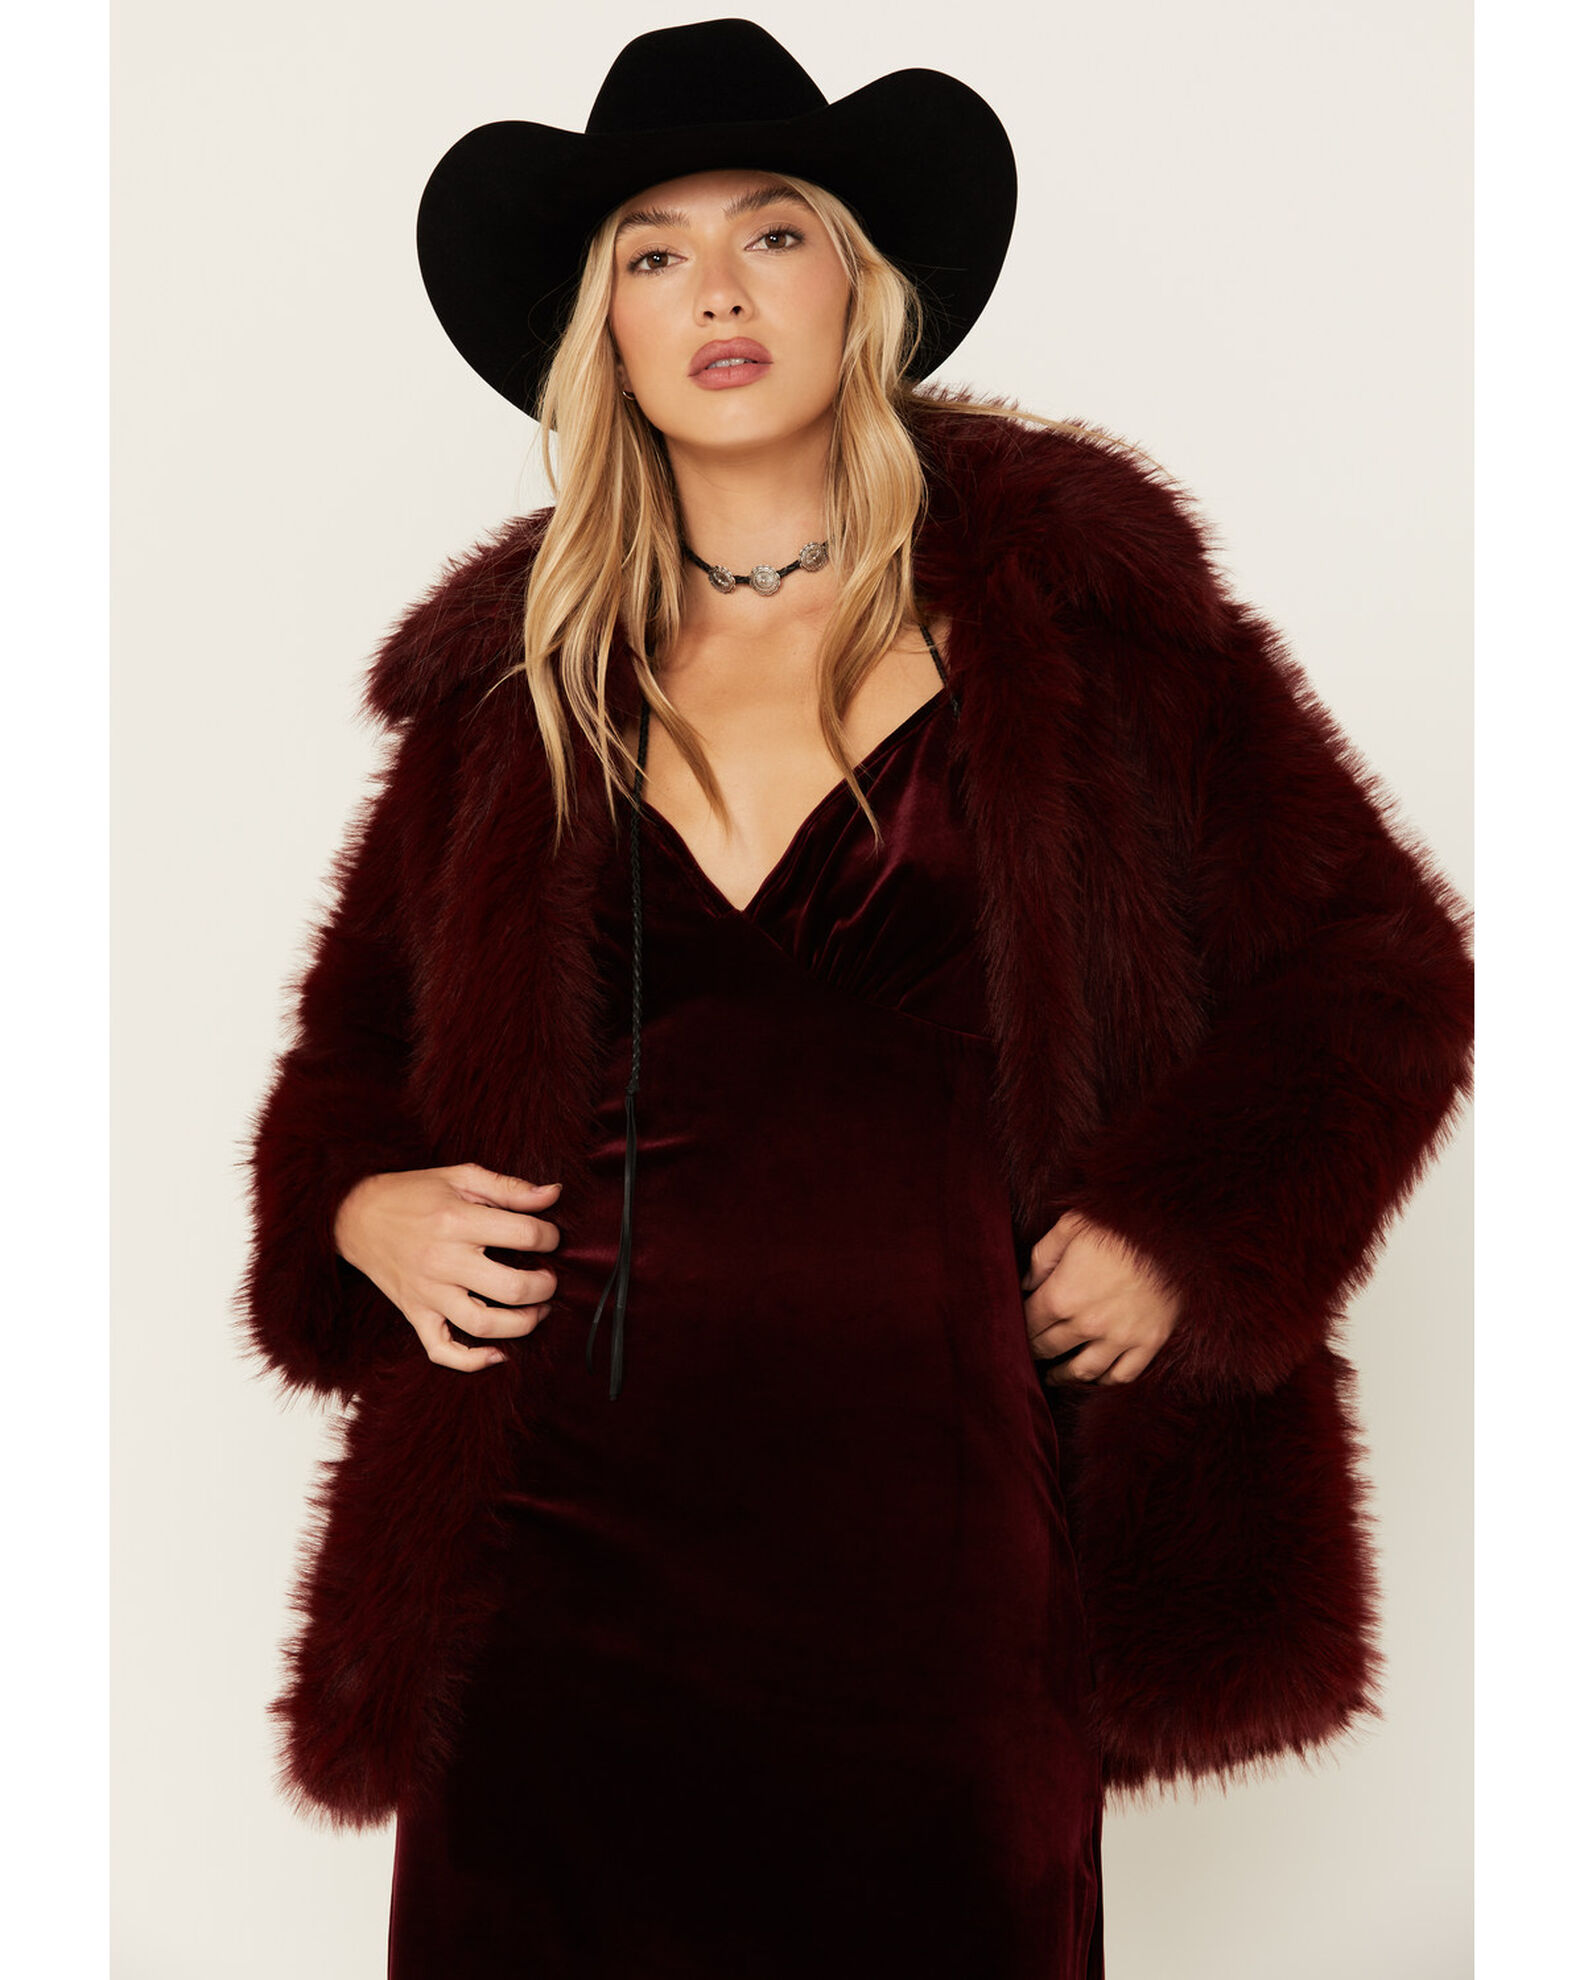 Band of the Free Women's Merica Faux Fur Jacket